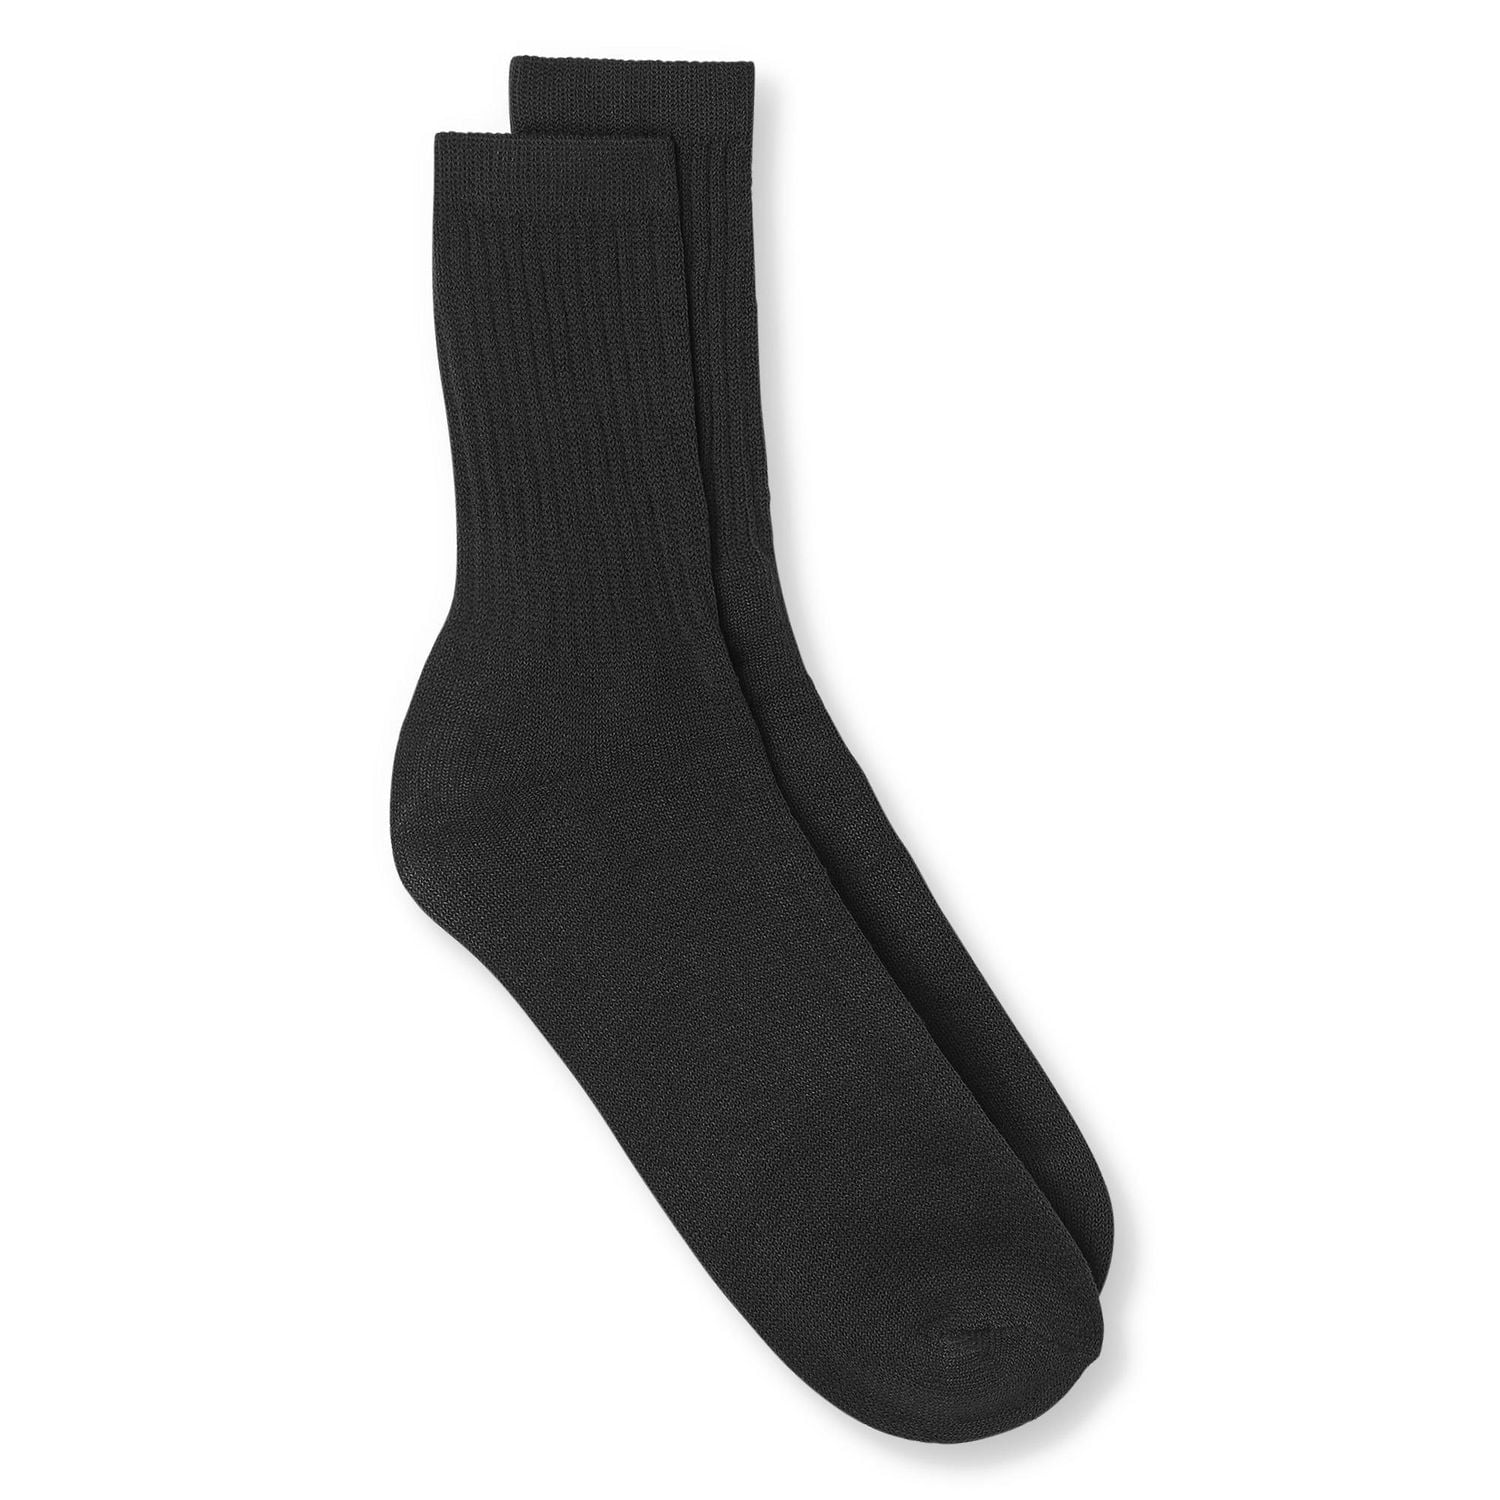 Skims Mens Tube Crew Sock 3 Pack In Stock Availability and Price